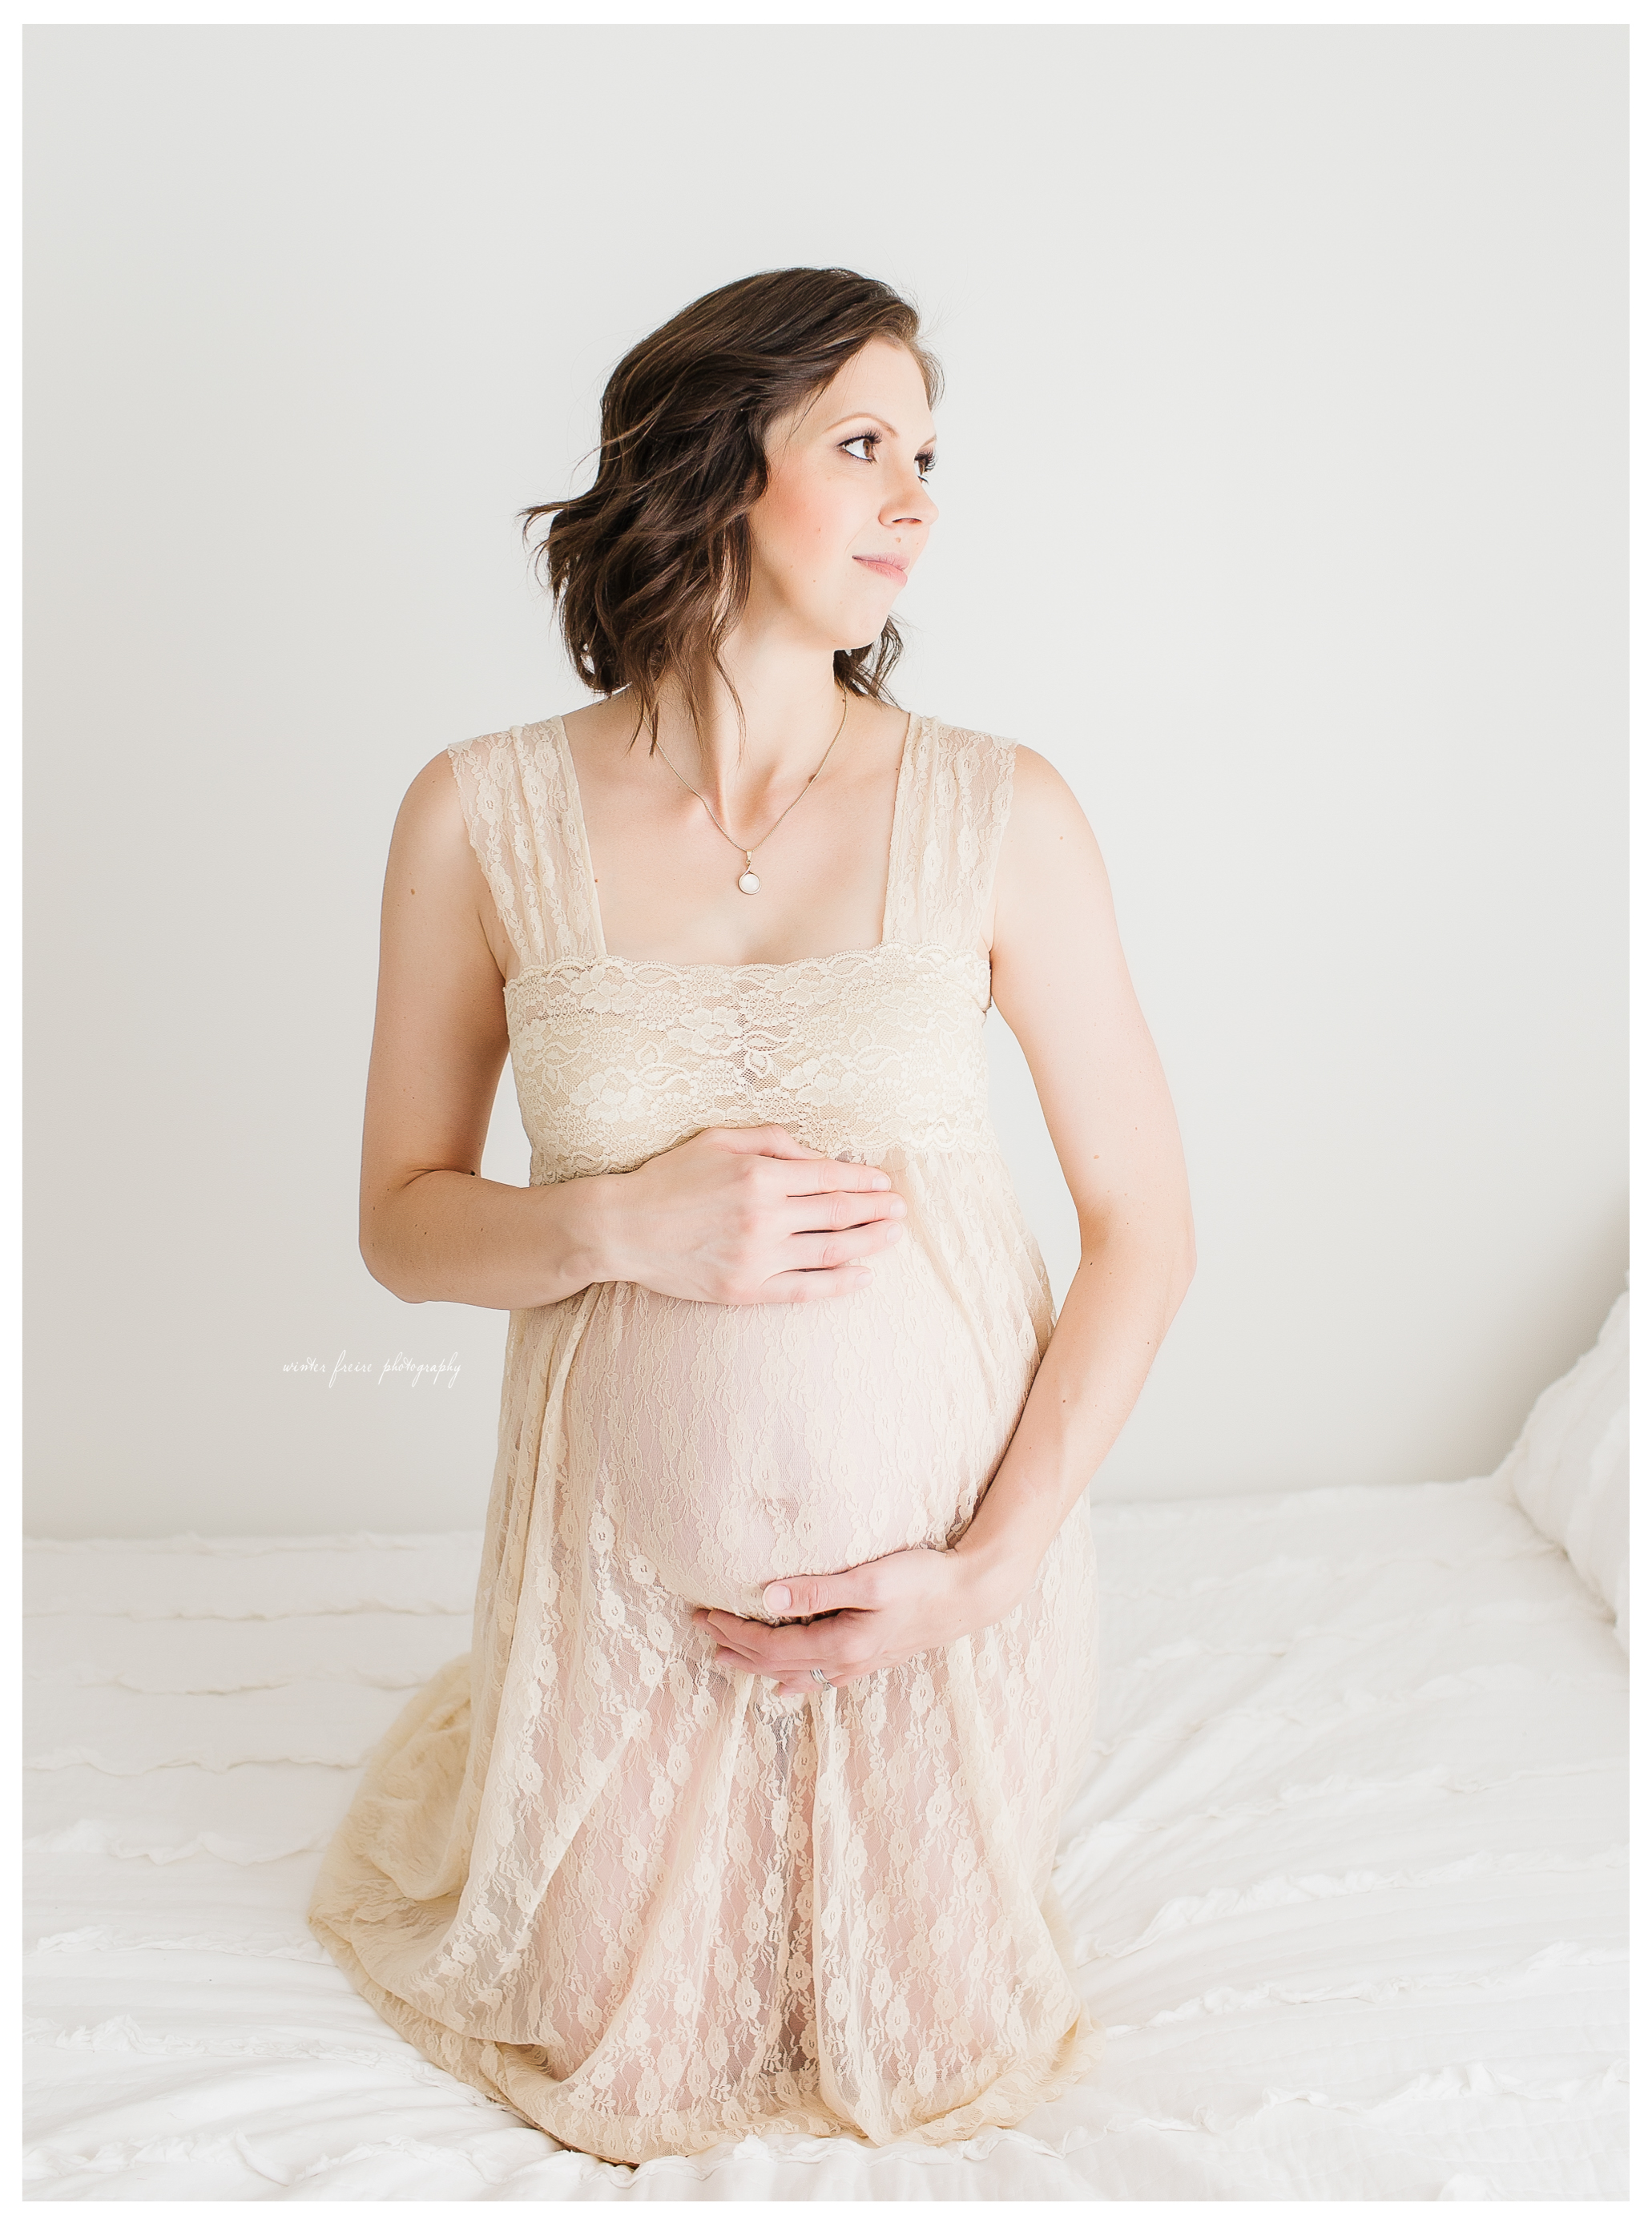 Winter Freire Photography | Sweet Pure Organic | Dayton, Ohio Maternity Photography | Dayton, Ohio Maternity Photographer | Motherhood | Maternity | Dayton, Ohio Photographer | Dayton, Ohio Photography